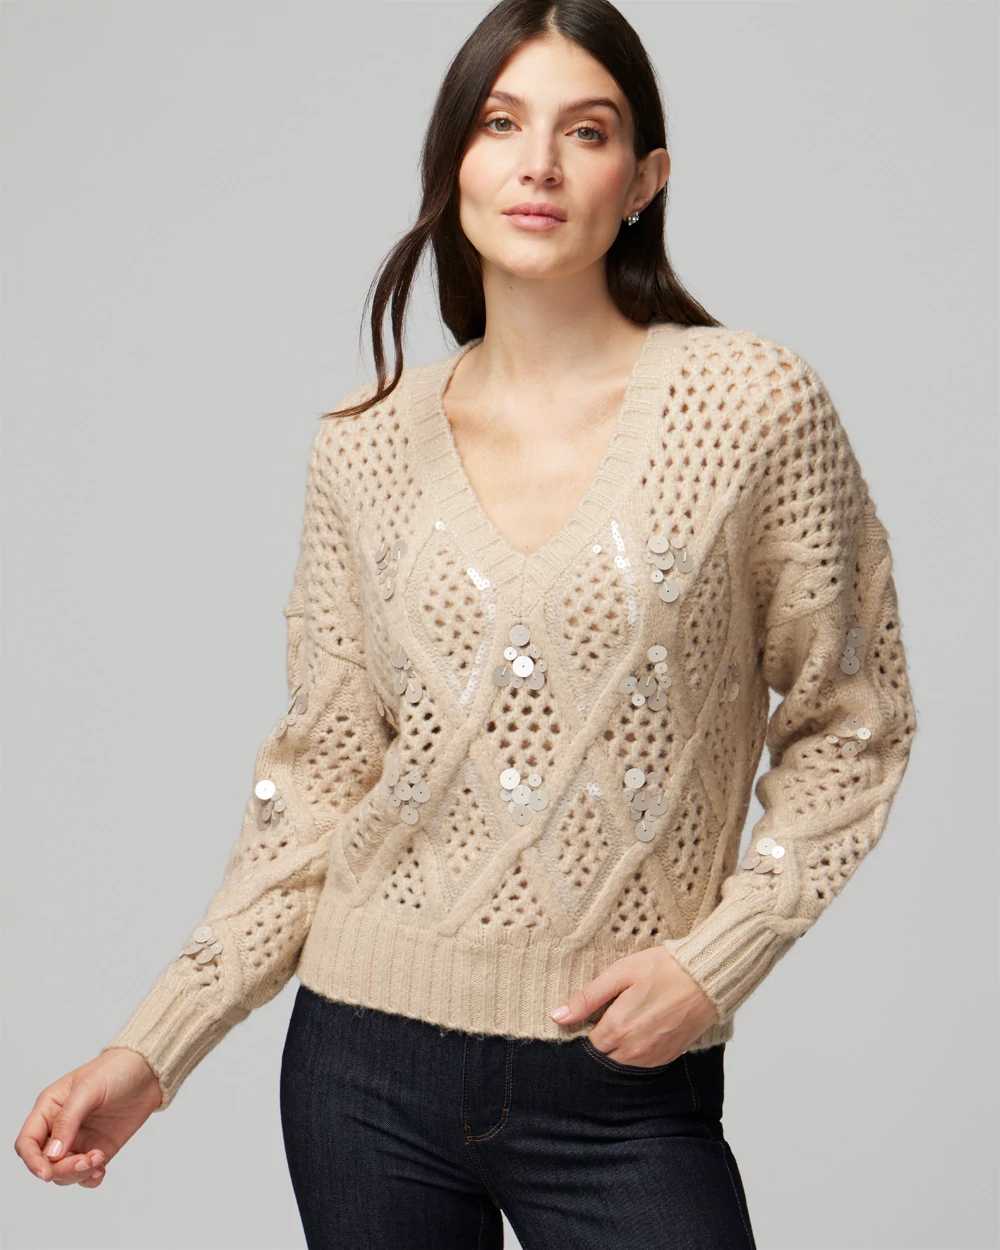 Embellished Cable Pullover Sweater click to view larger image.